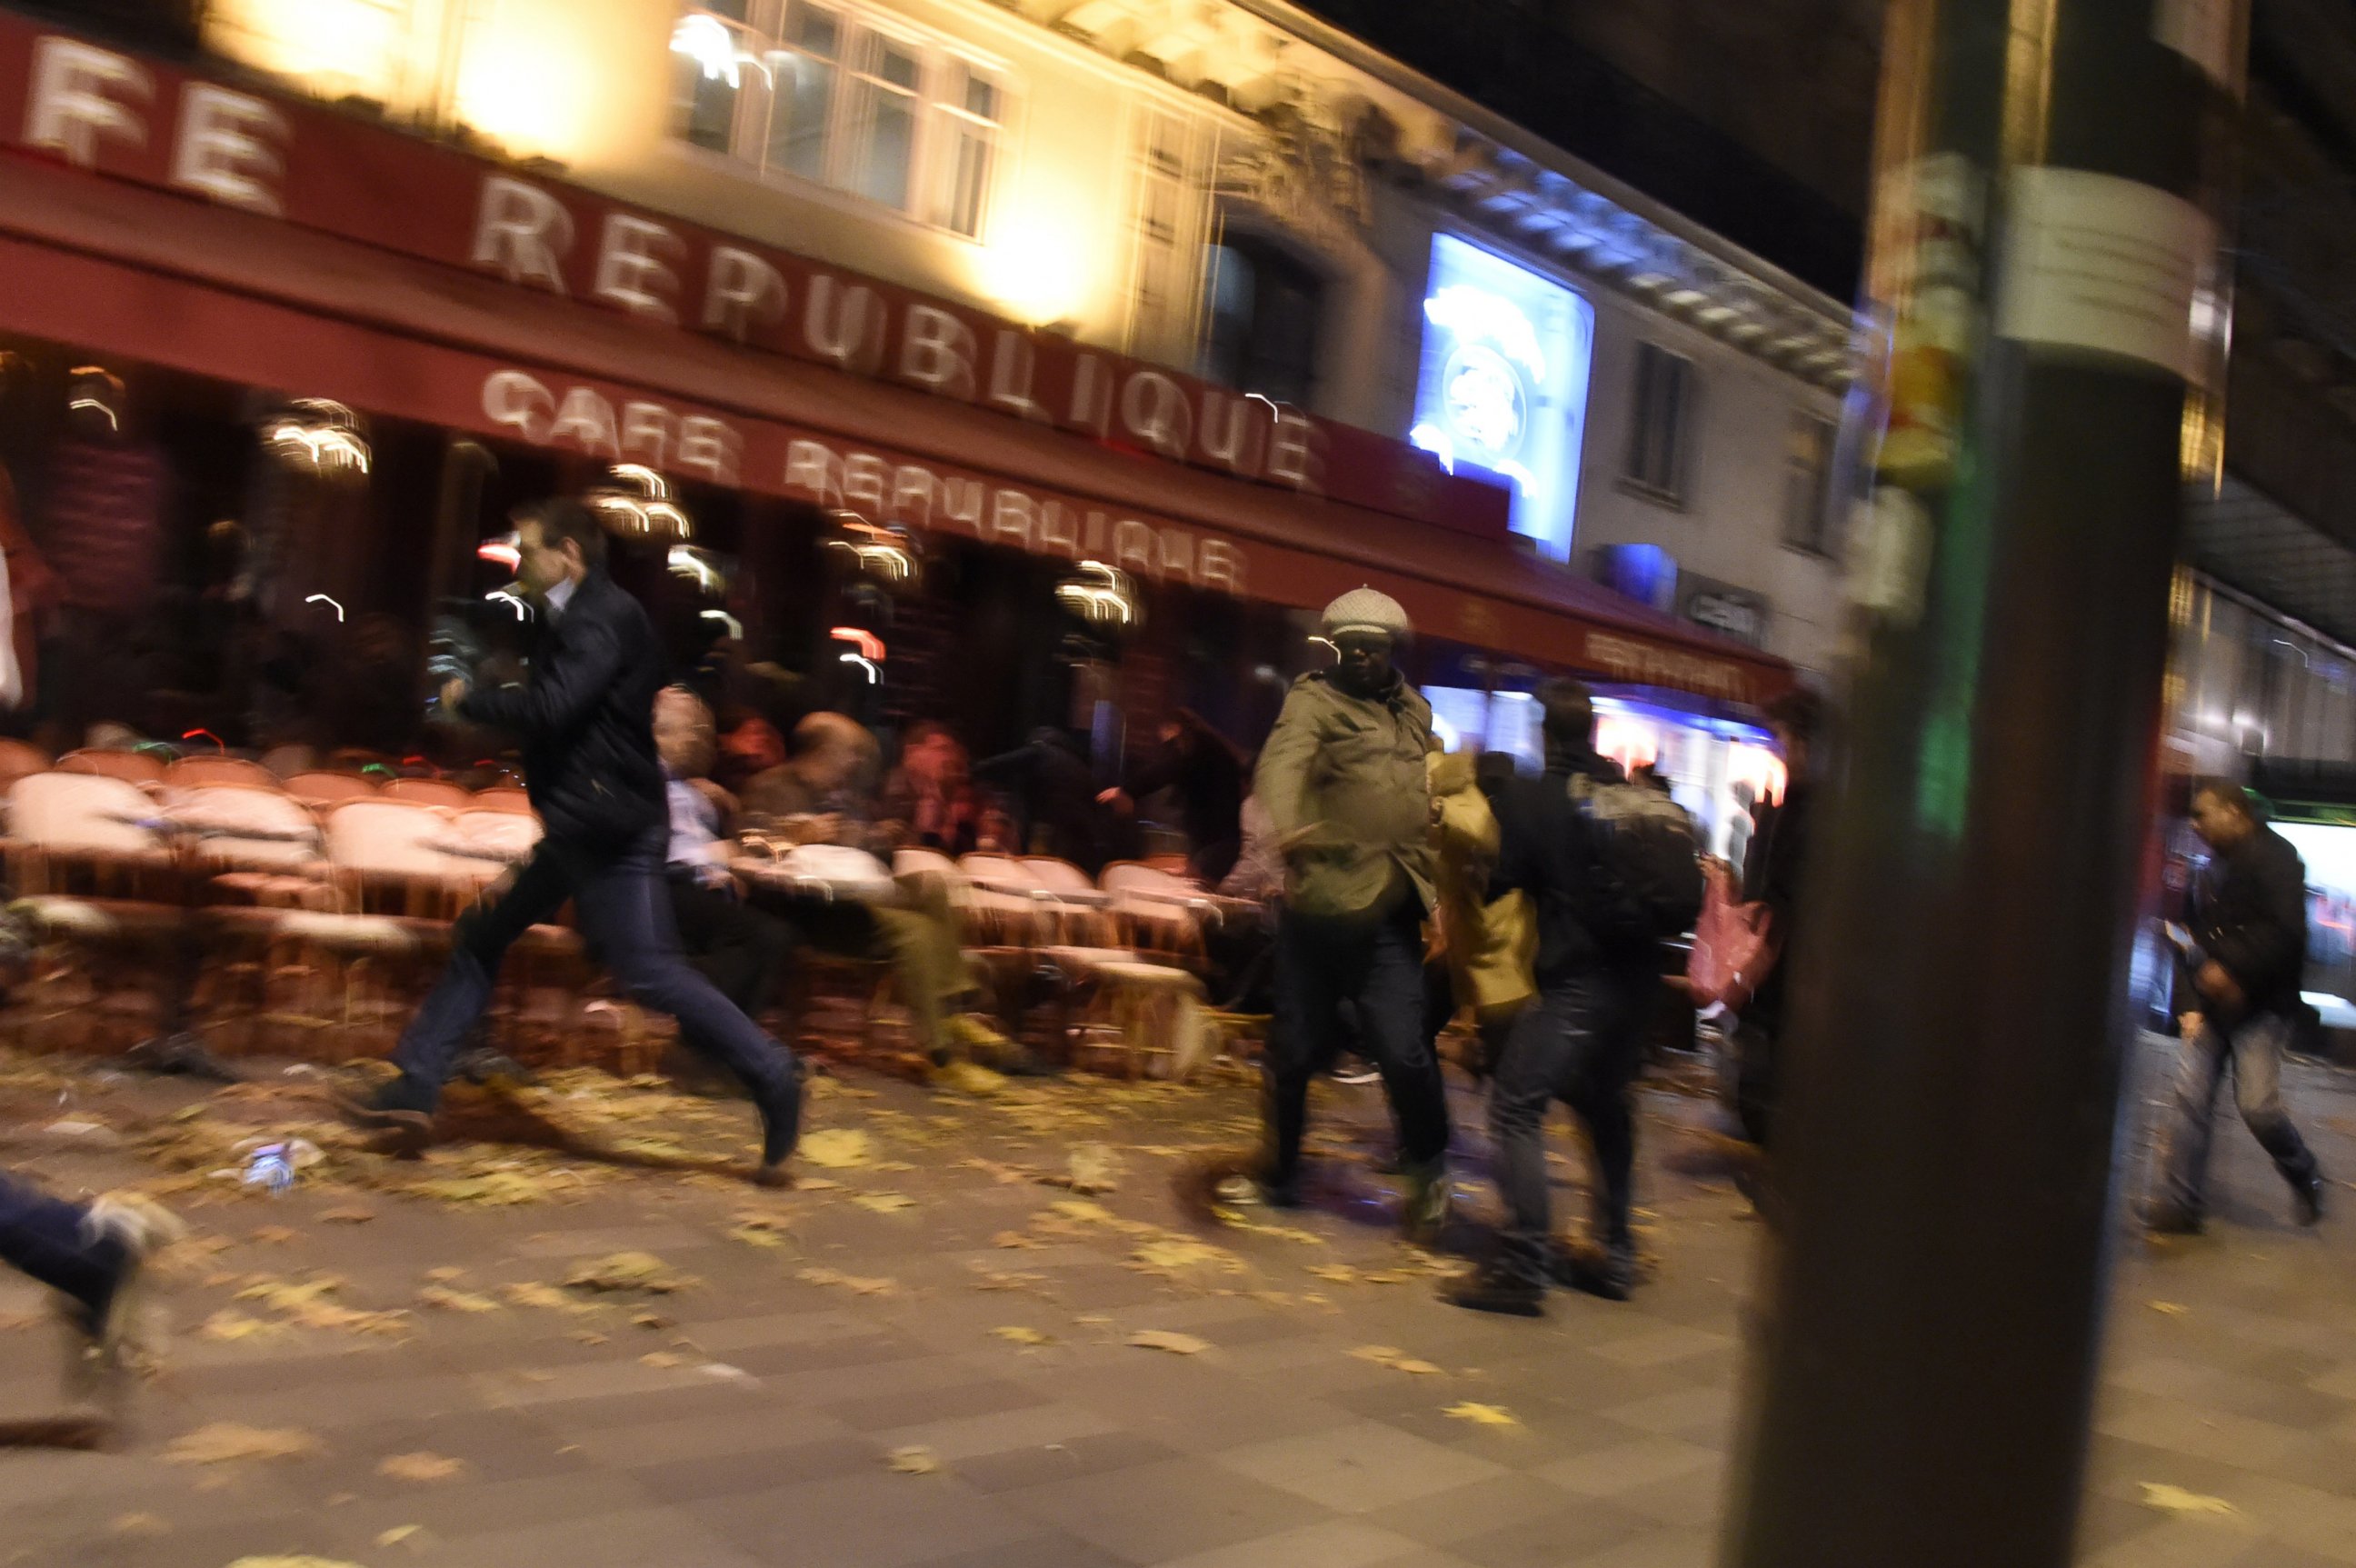 PHOTO: People run after hearing what is believed to be explosions or gun shots near Place de la Republique square in Paris on Nov. 13, 2015.